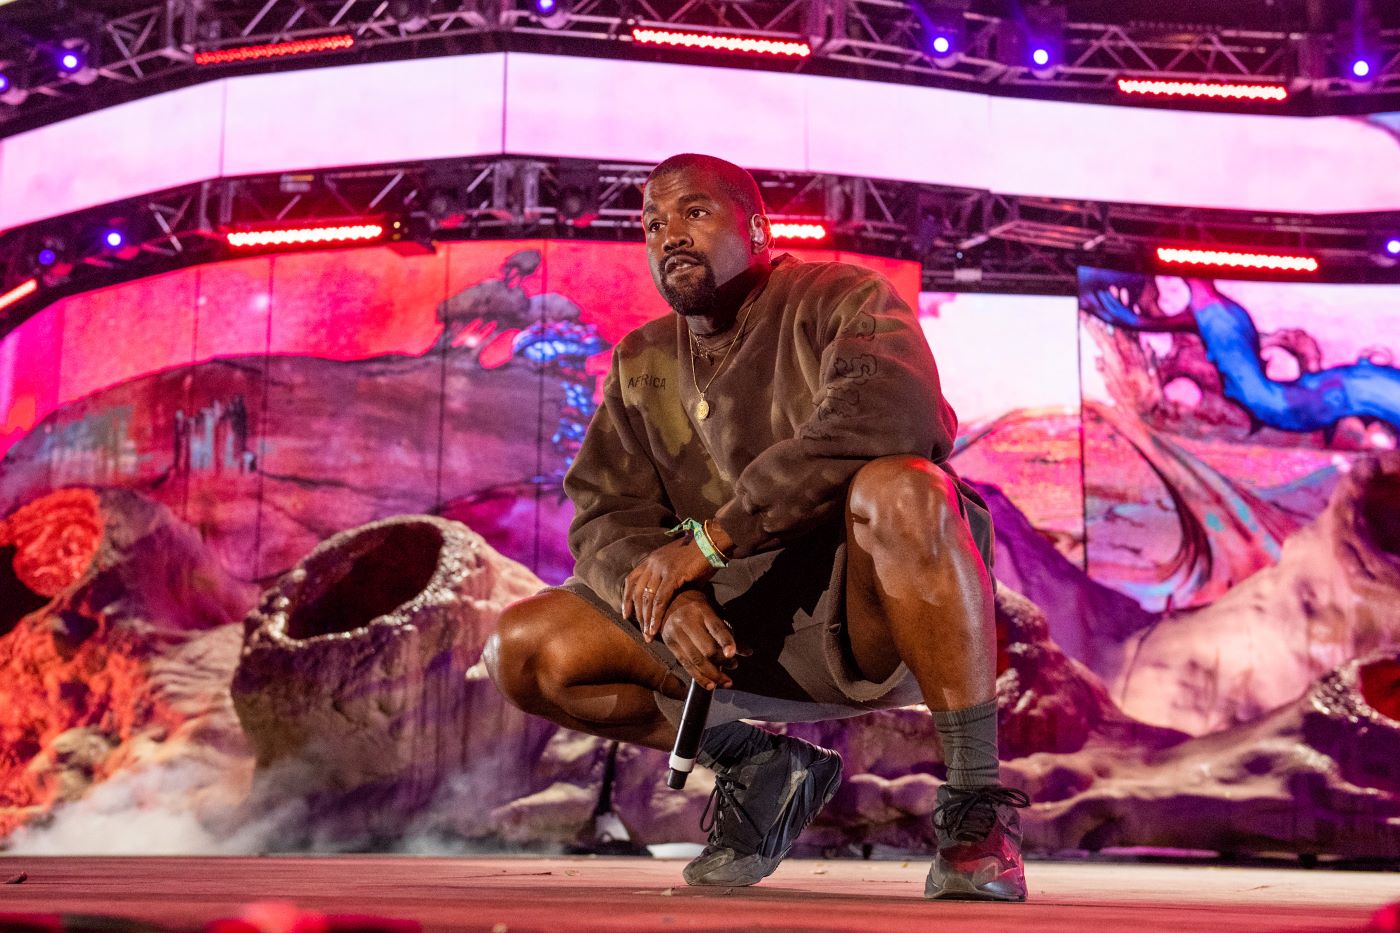 Kanye West wearing shorts and a brown jacket squatting with a microphone in his hand resting his hands on his knees. The background is red, pink and brown in color.